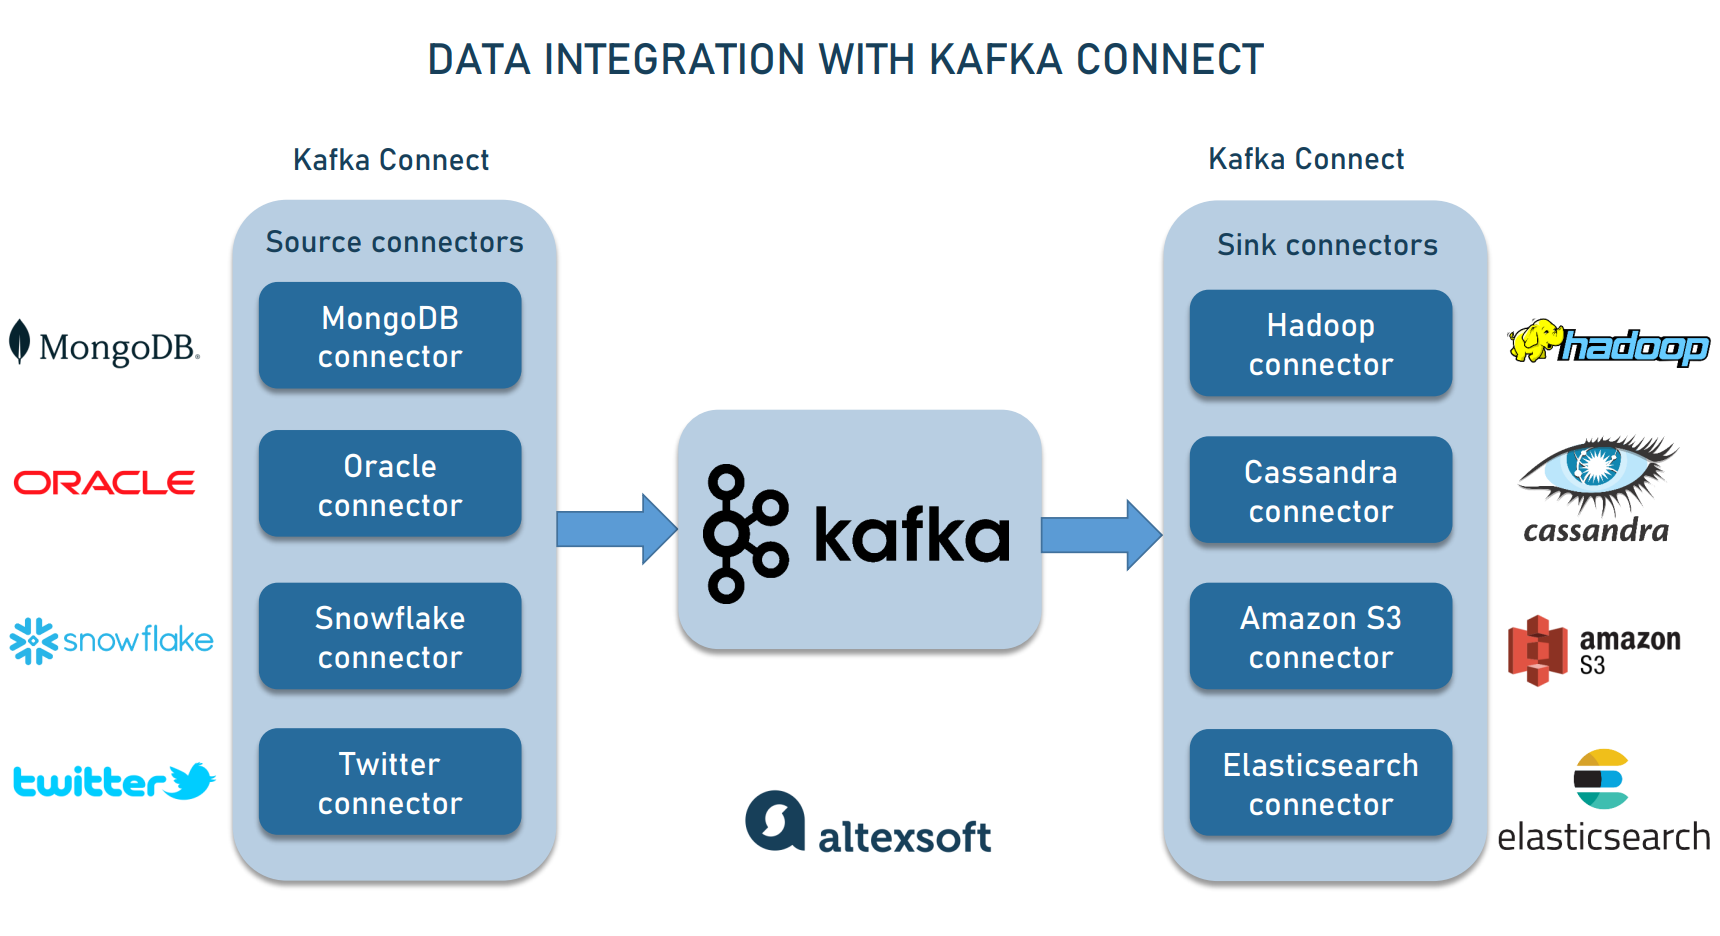 Who is the biggest user of Kafka?